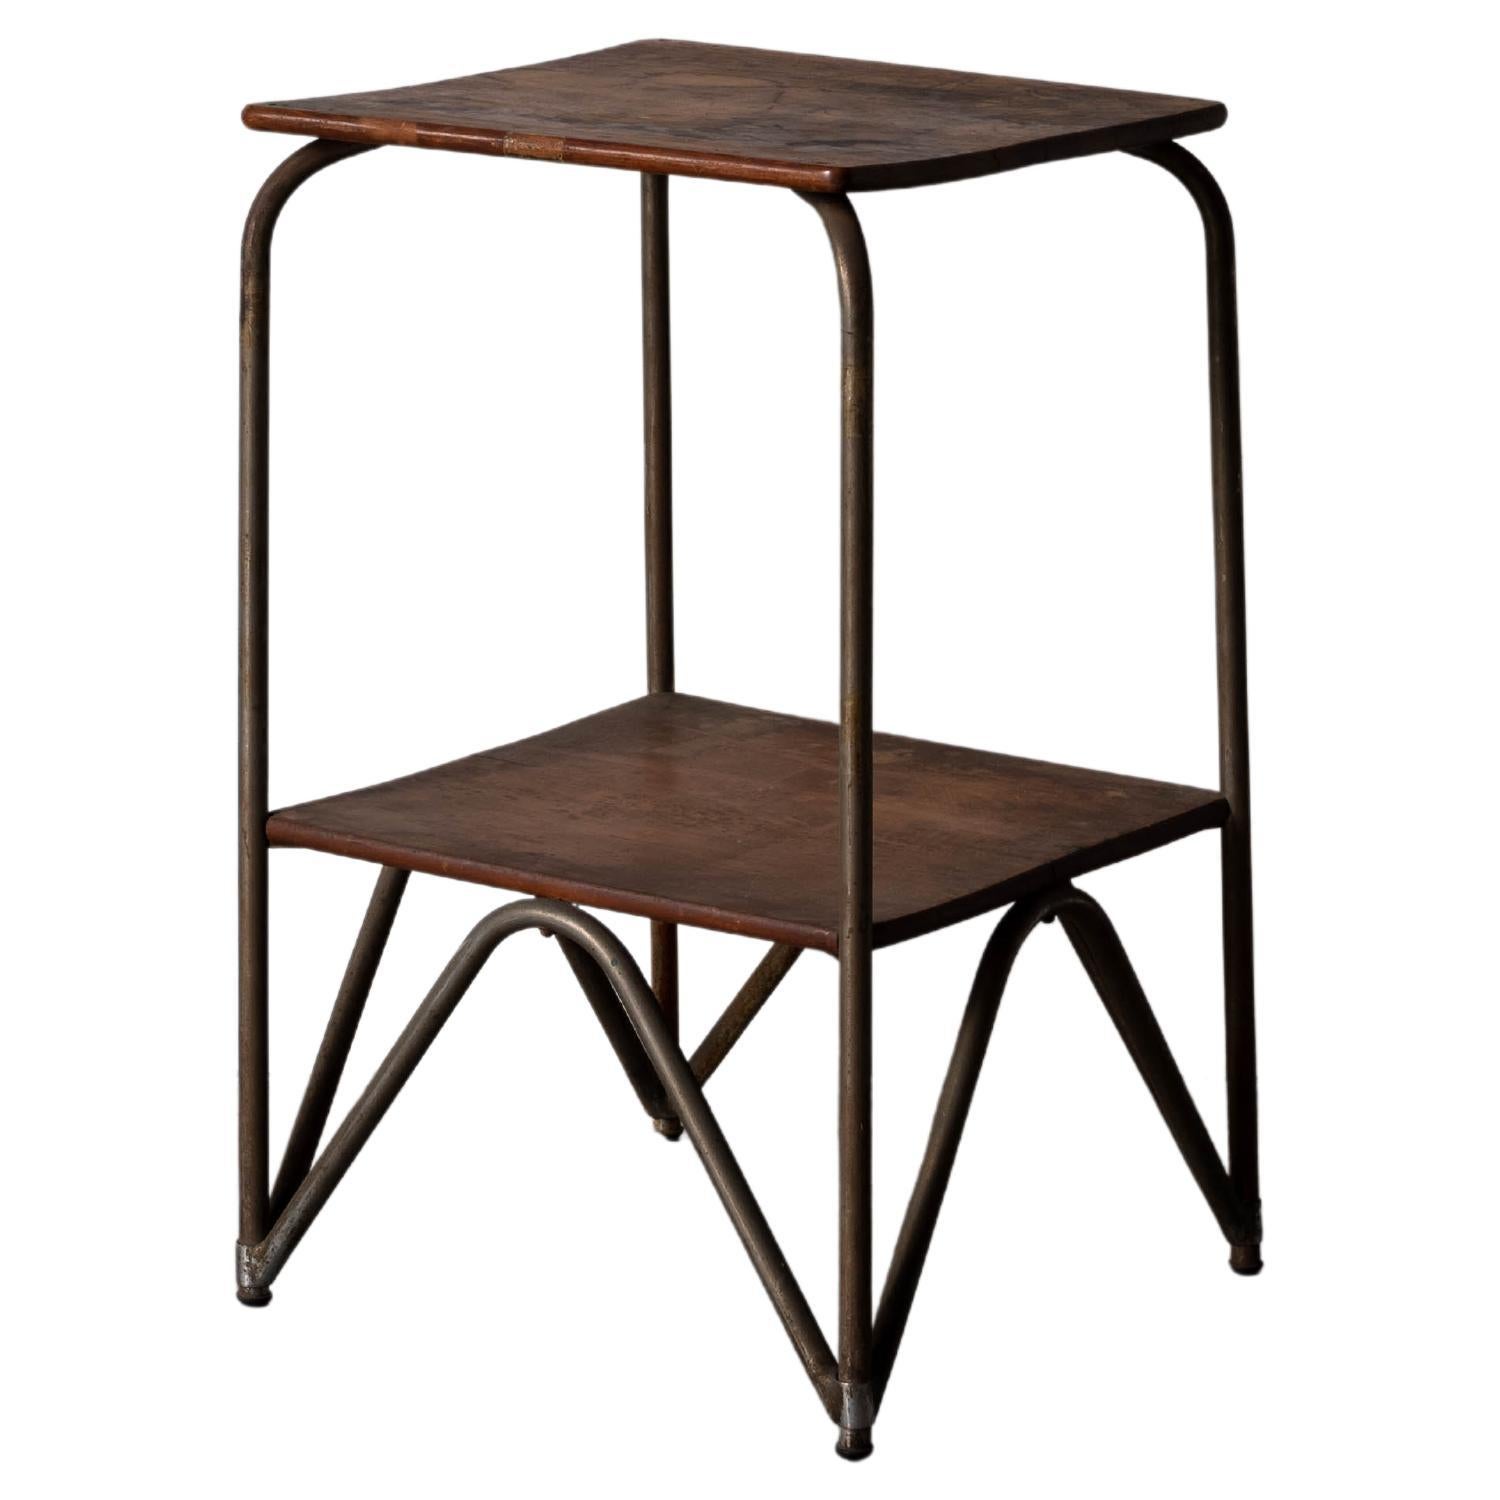 Italian Designer, Side Table or End Table, Iron, Walnut, Italy, 1930s